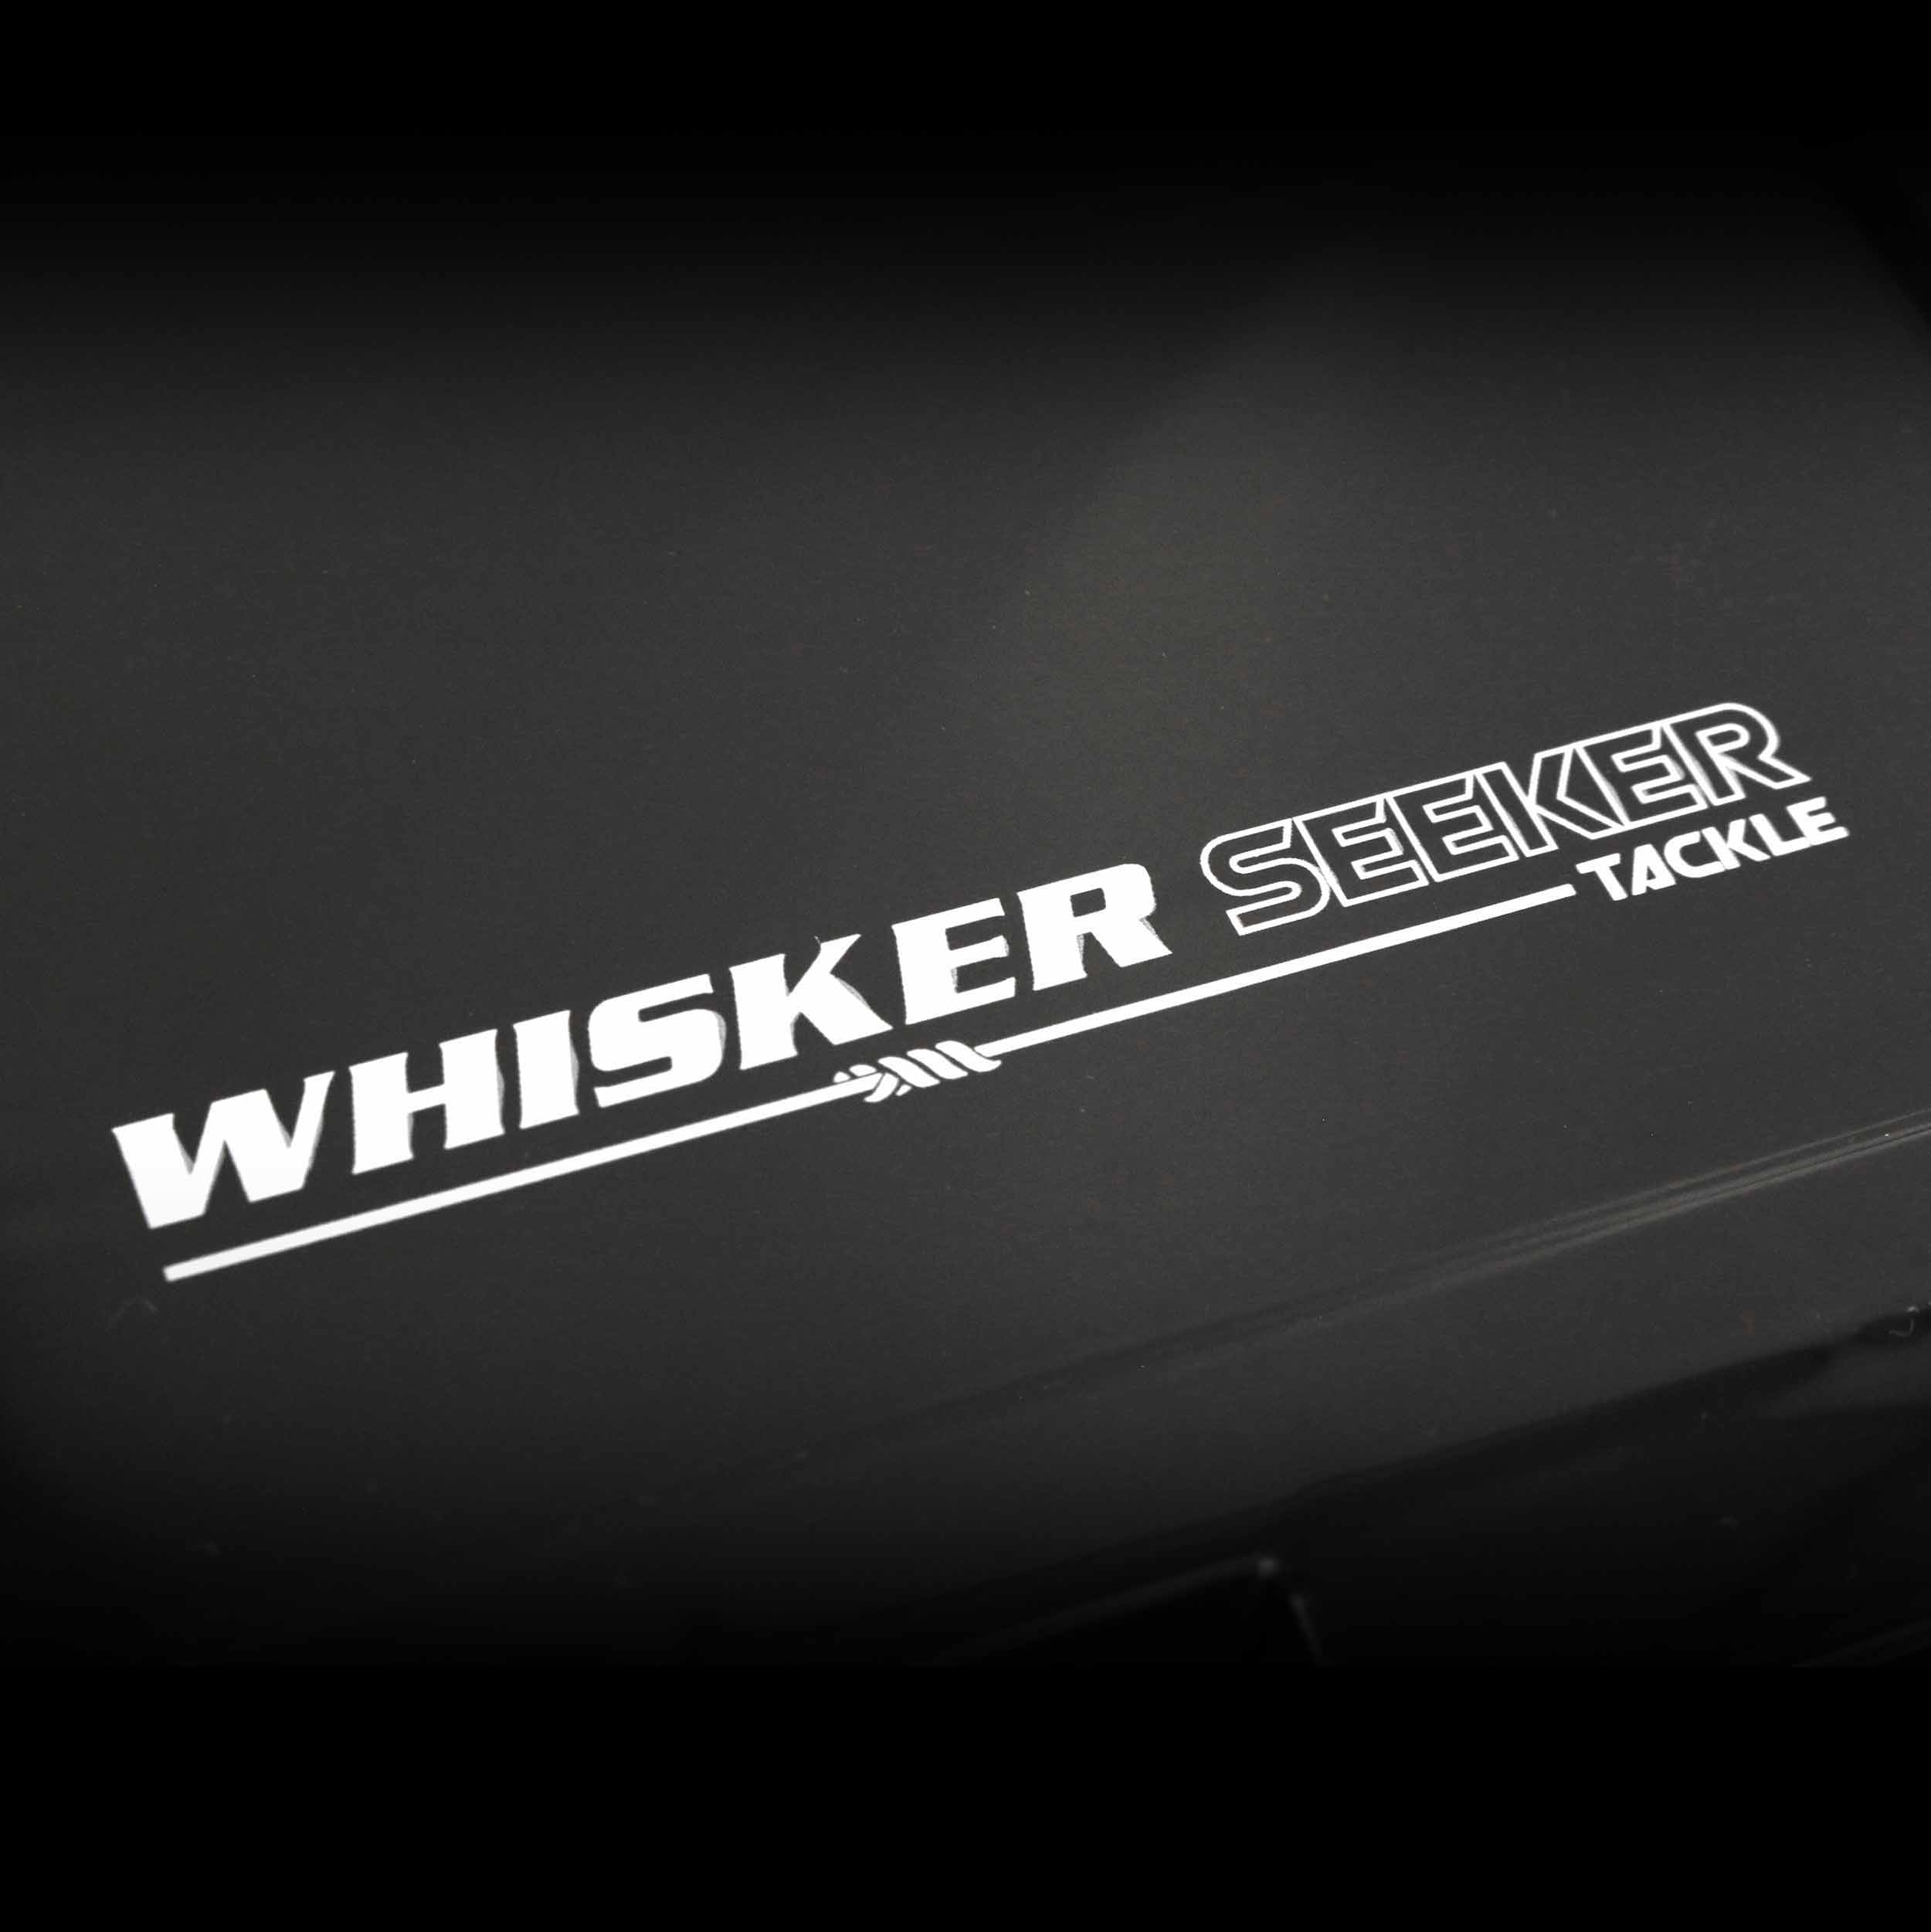 Whisker Seeker Tackle logo pad printed in white on top of box